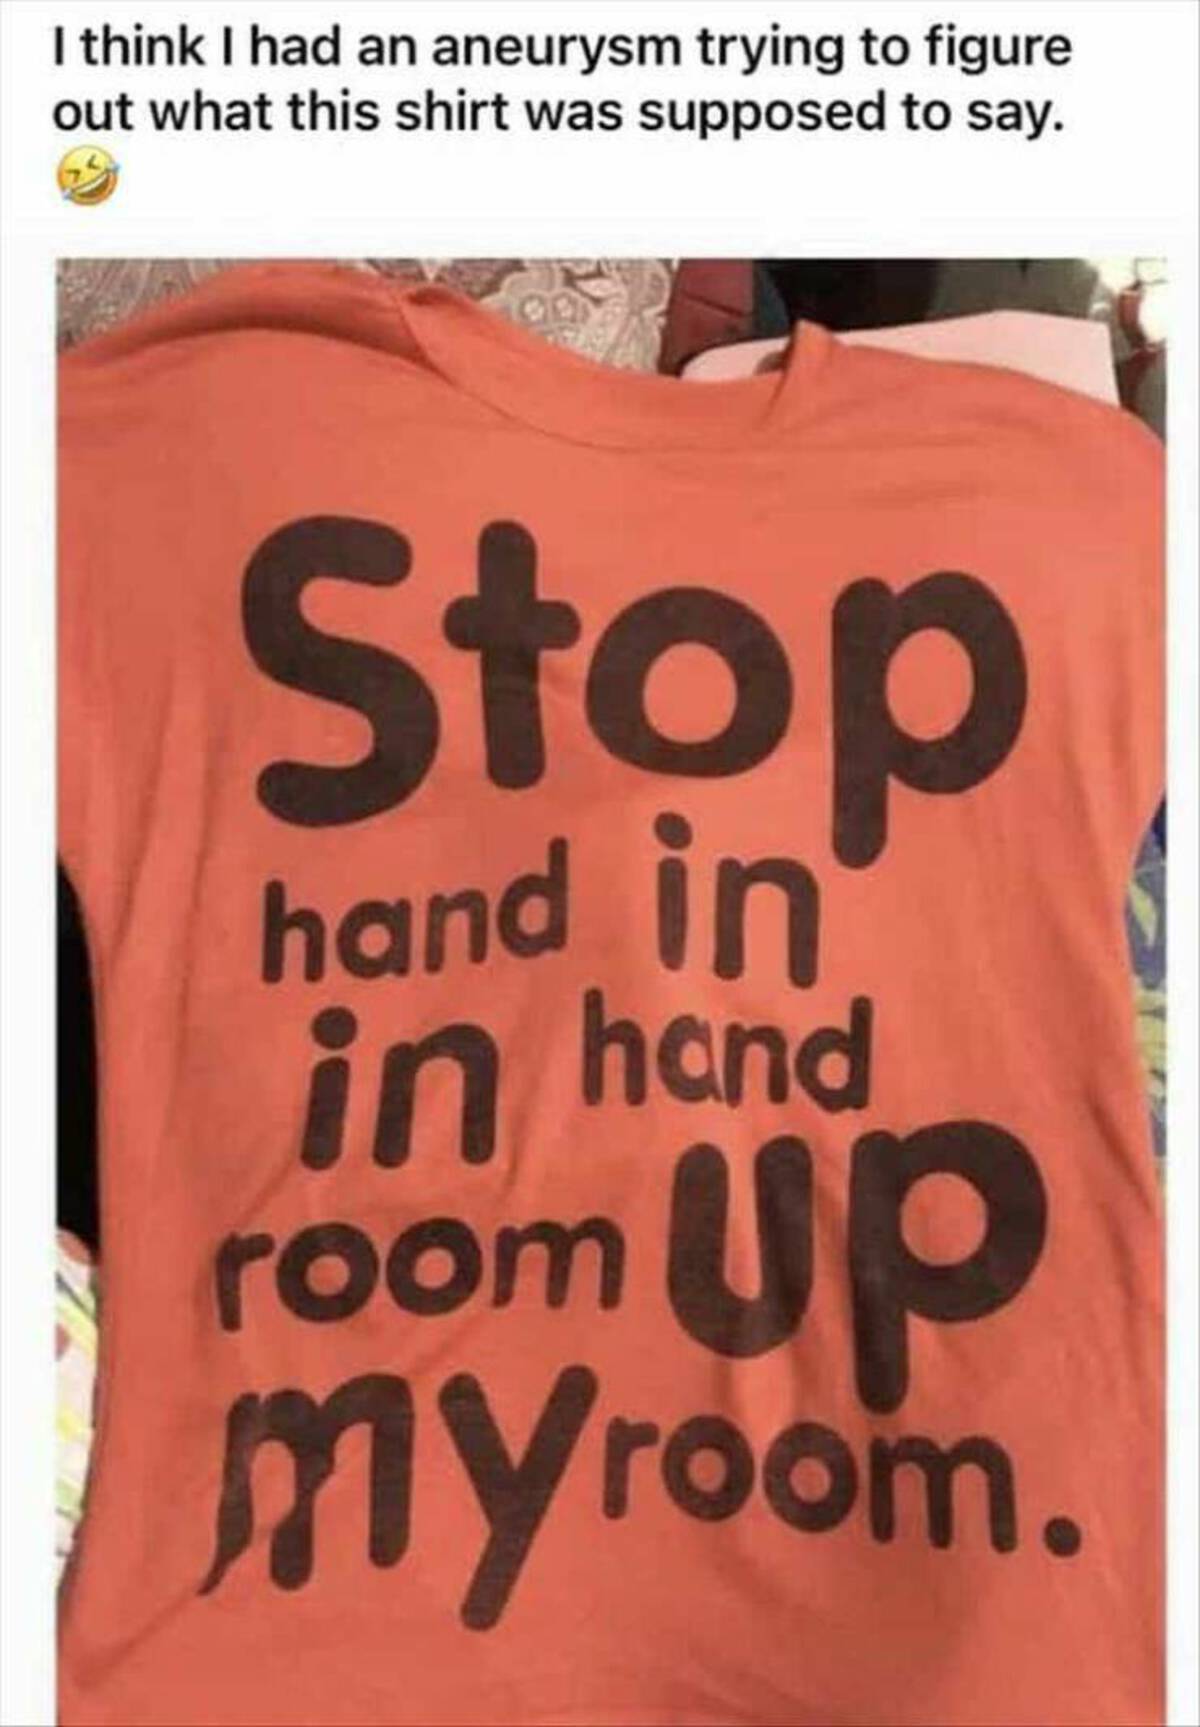 blouse - I think I had an aneurysm trying to figure out what this shirt was supposed to say. Stop hand in in hand room up myroom.